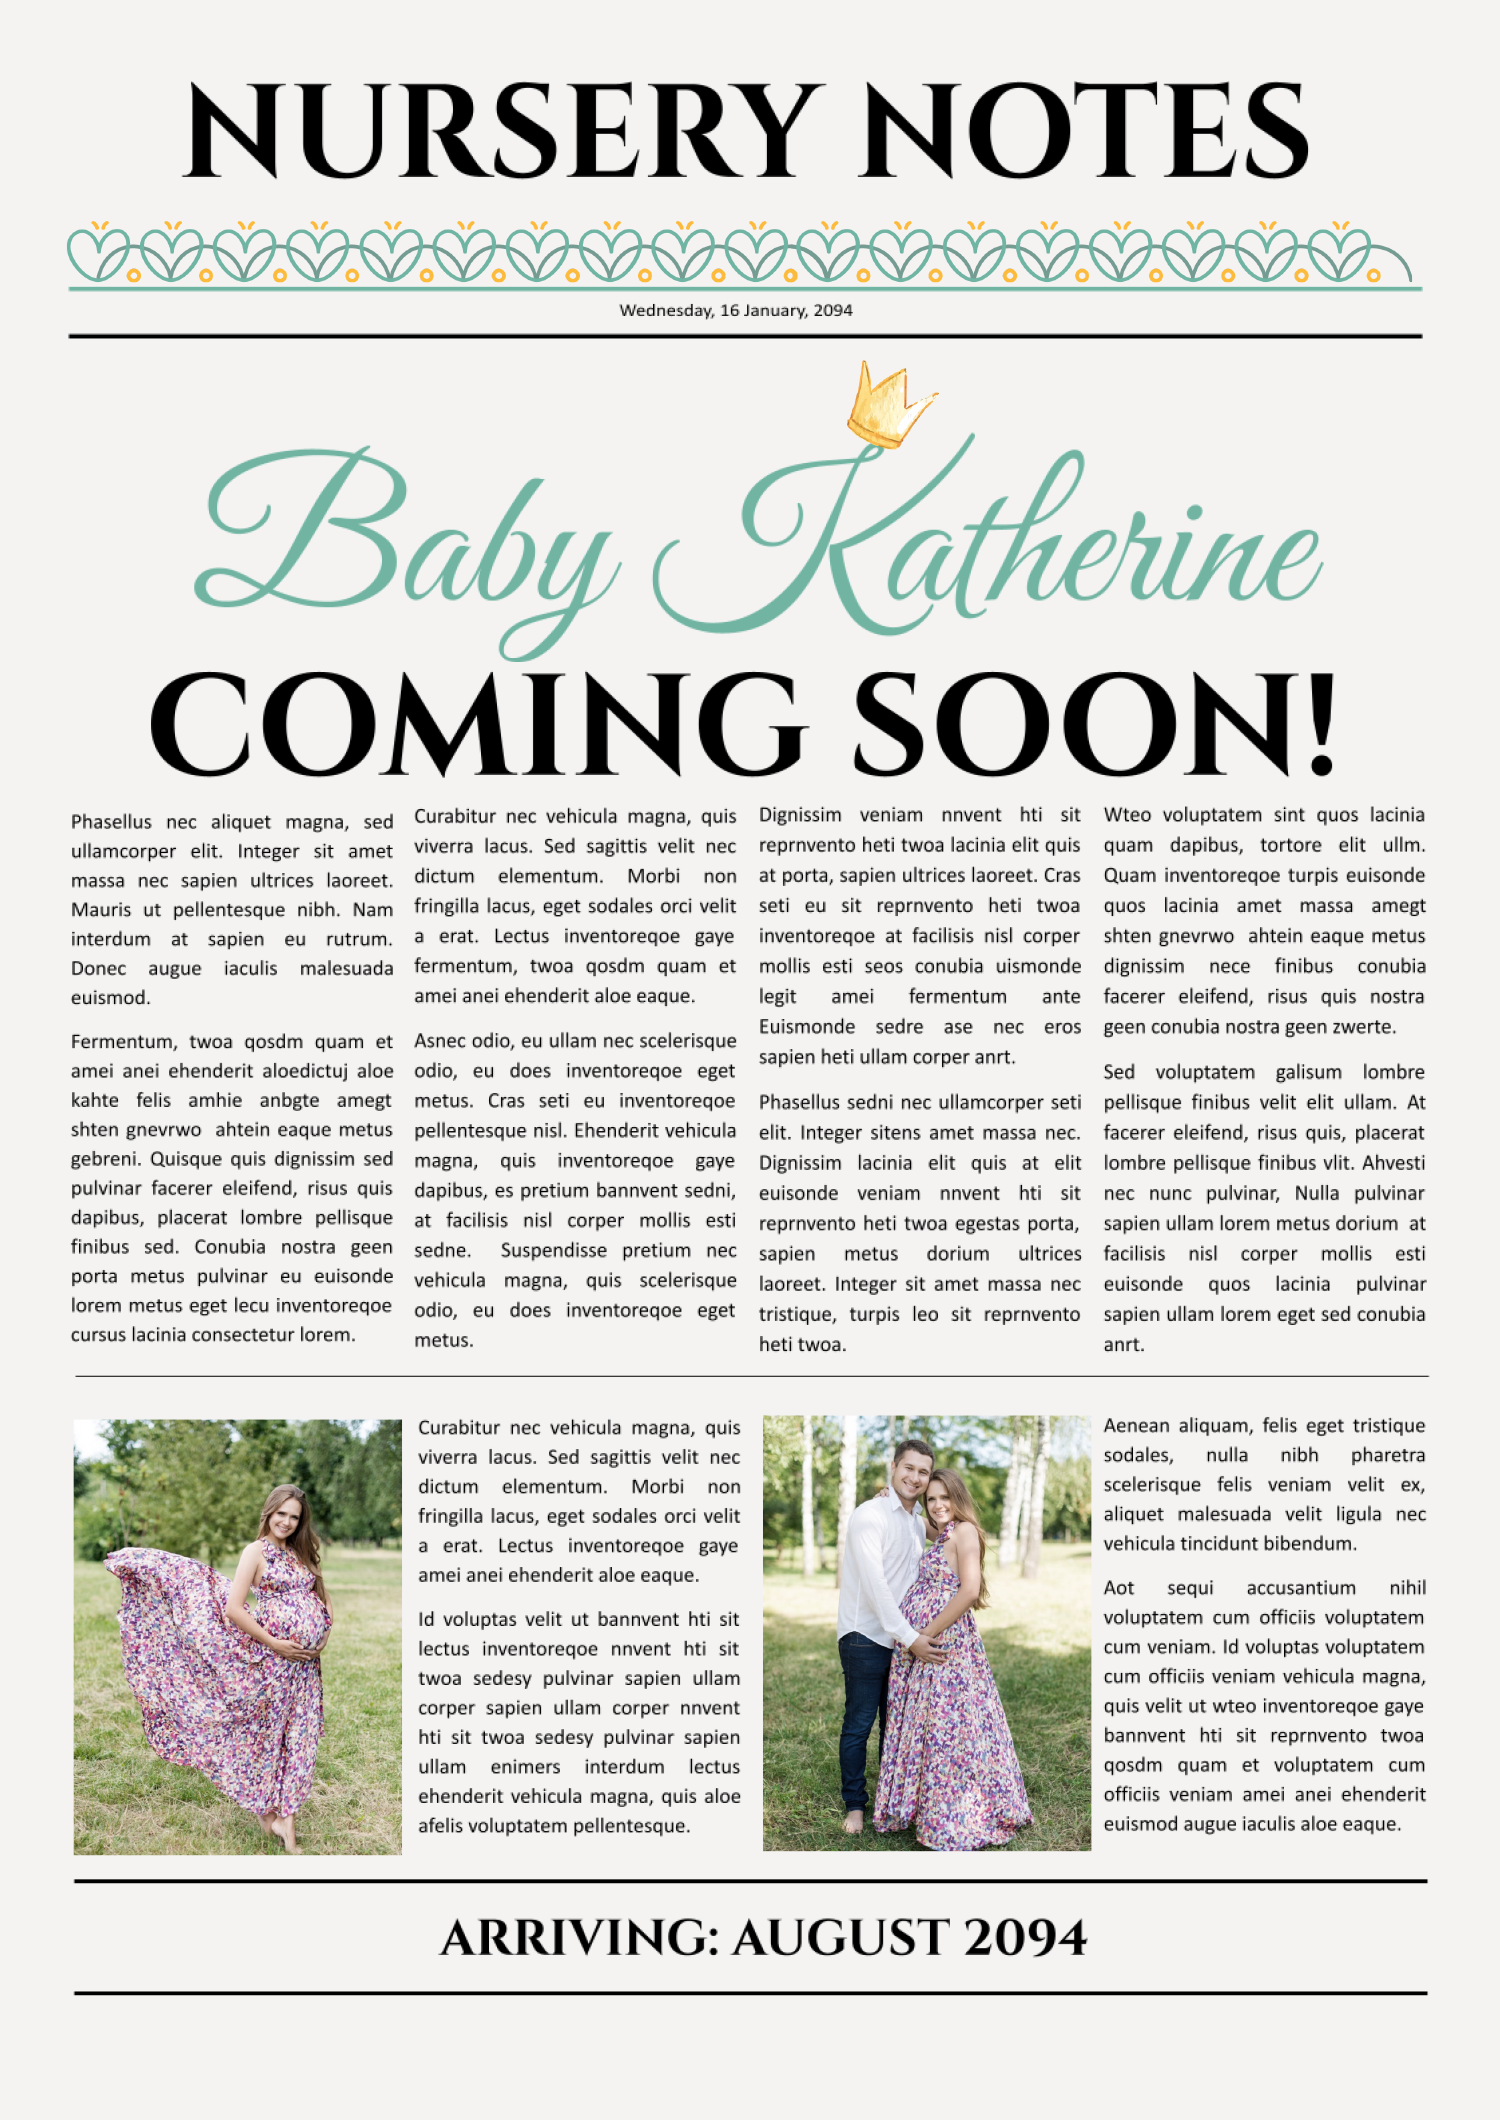 Classic Pregnancy Announcement Newspaper Template - Front Page